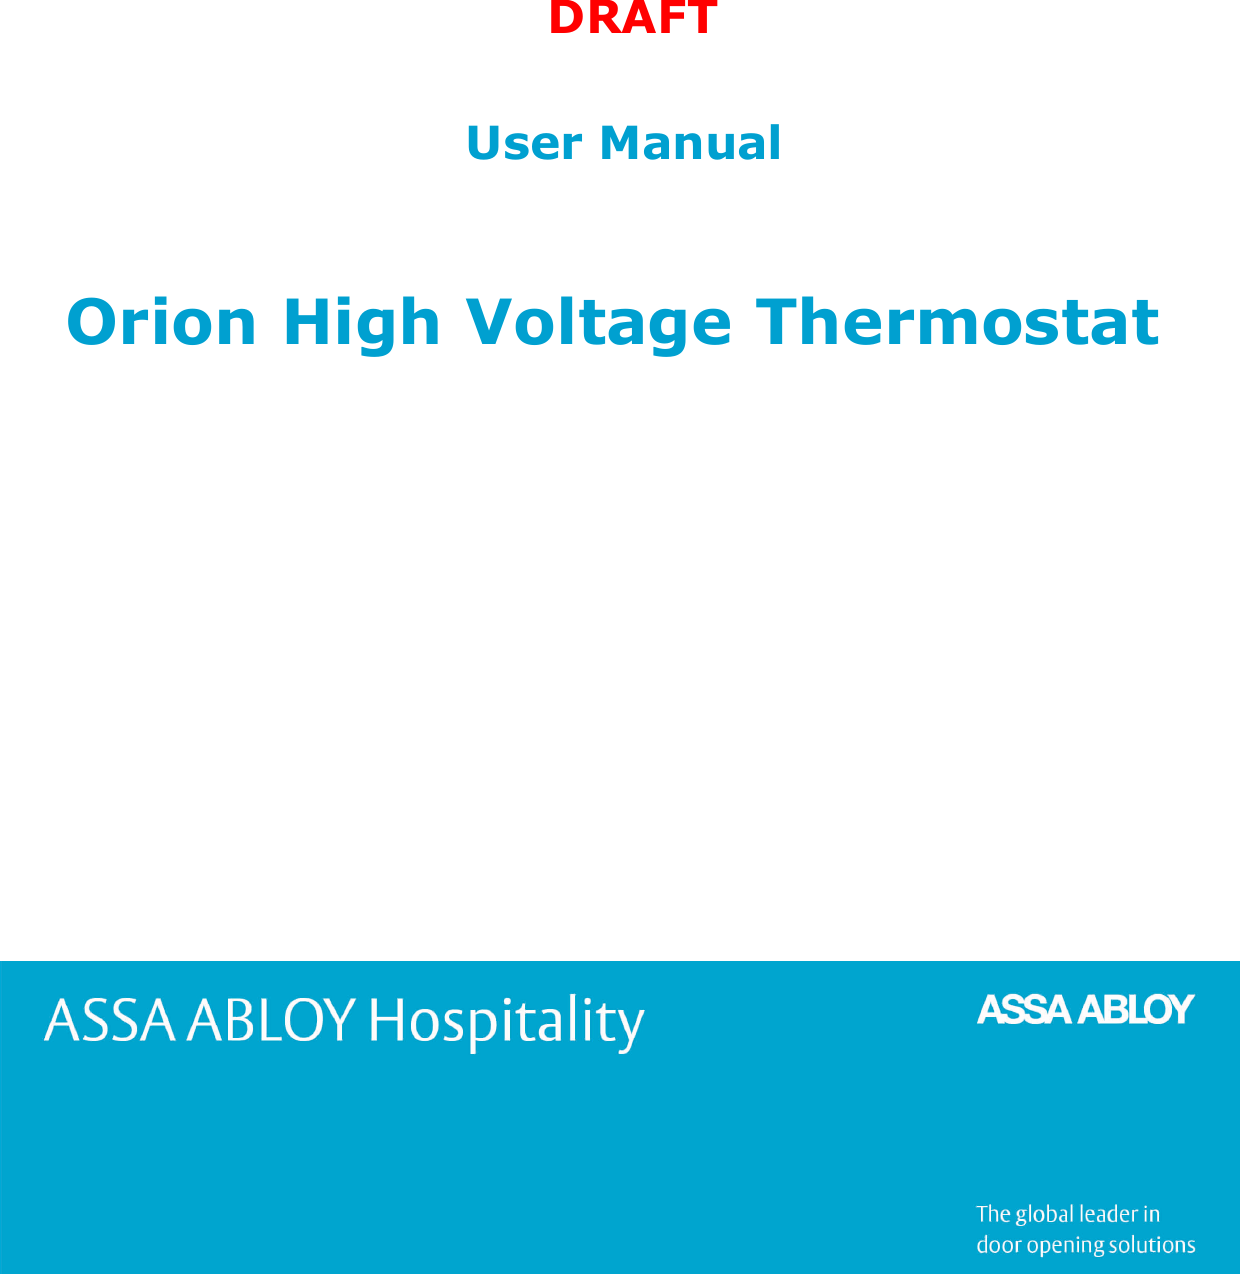 1ASSA ABLOY Hospitality 66 8003 015-3User ManualOrion High Voltage ThermostatDRAFT